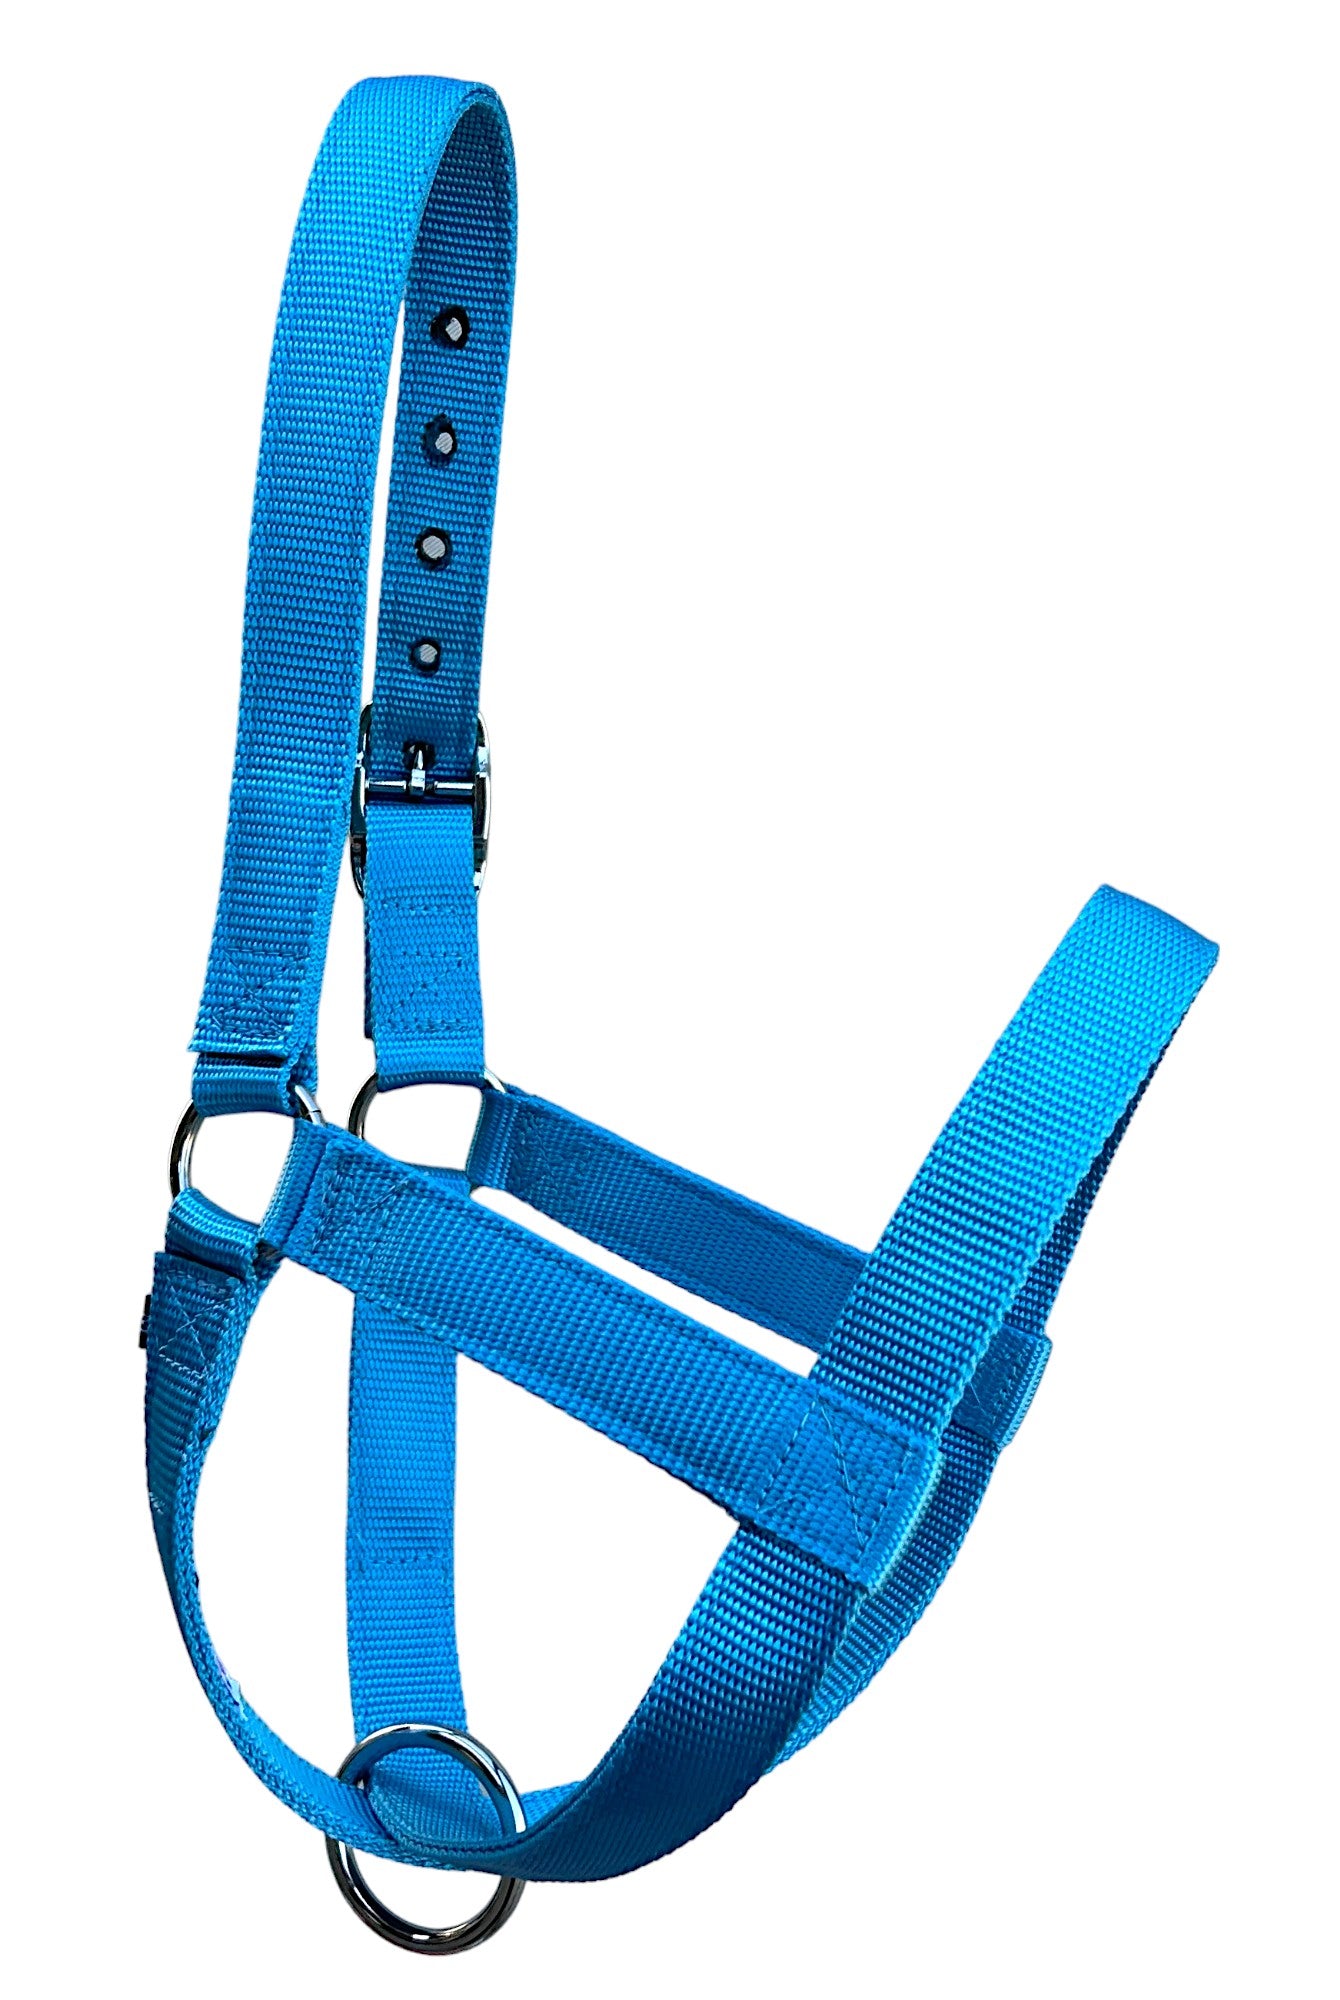 Donkey Figure 8 Halter, Sizes XS, S, Solid Colors